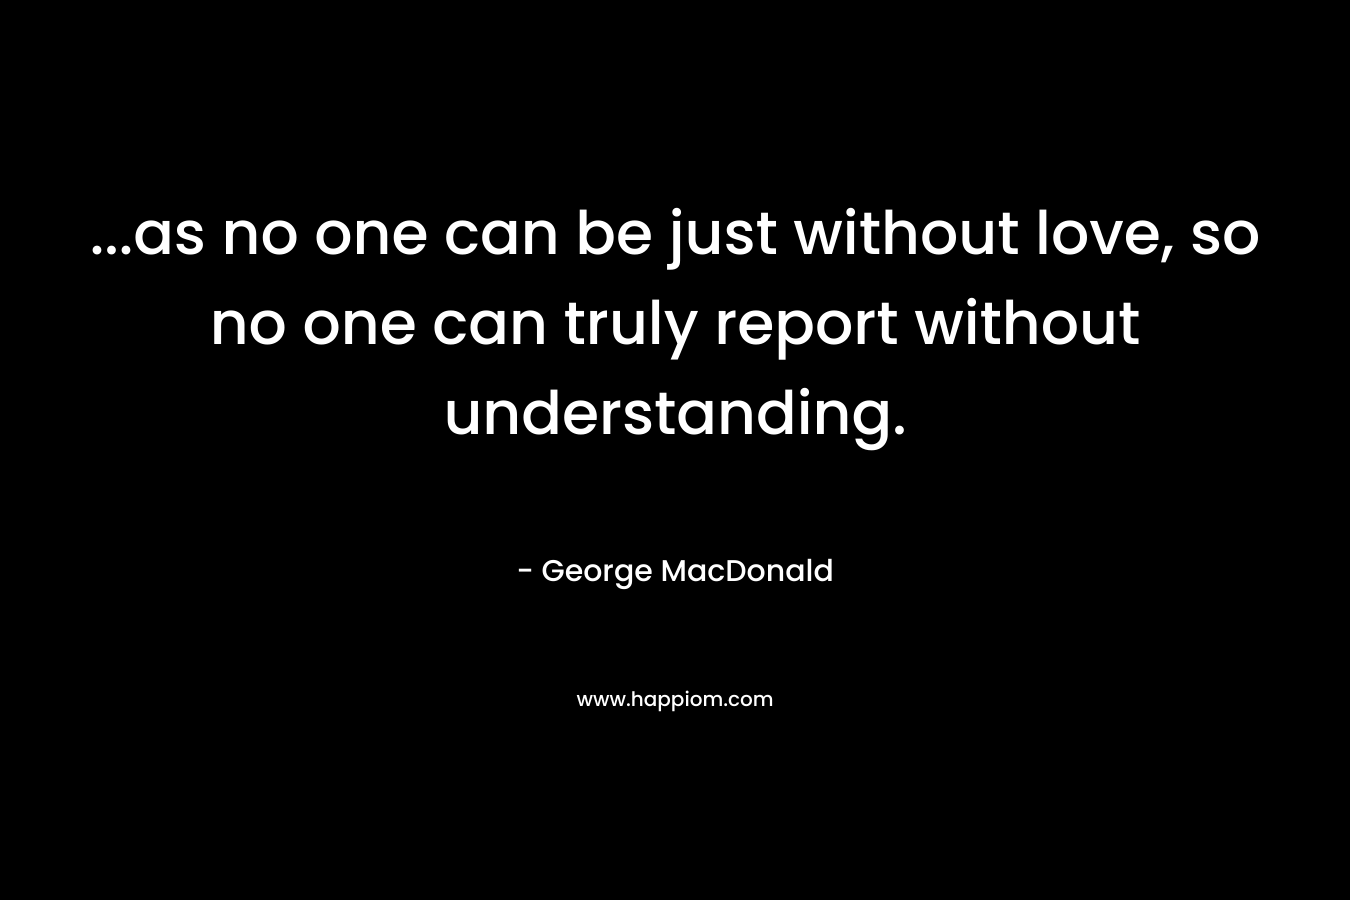 ...as no one can be just without love, so no one can truly report without understanding.